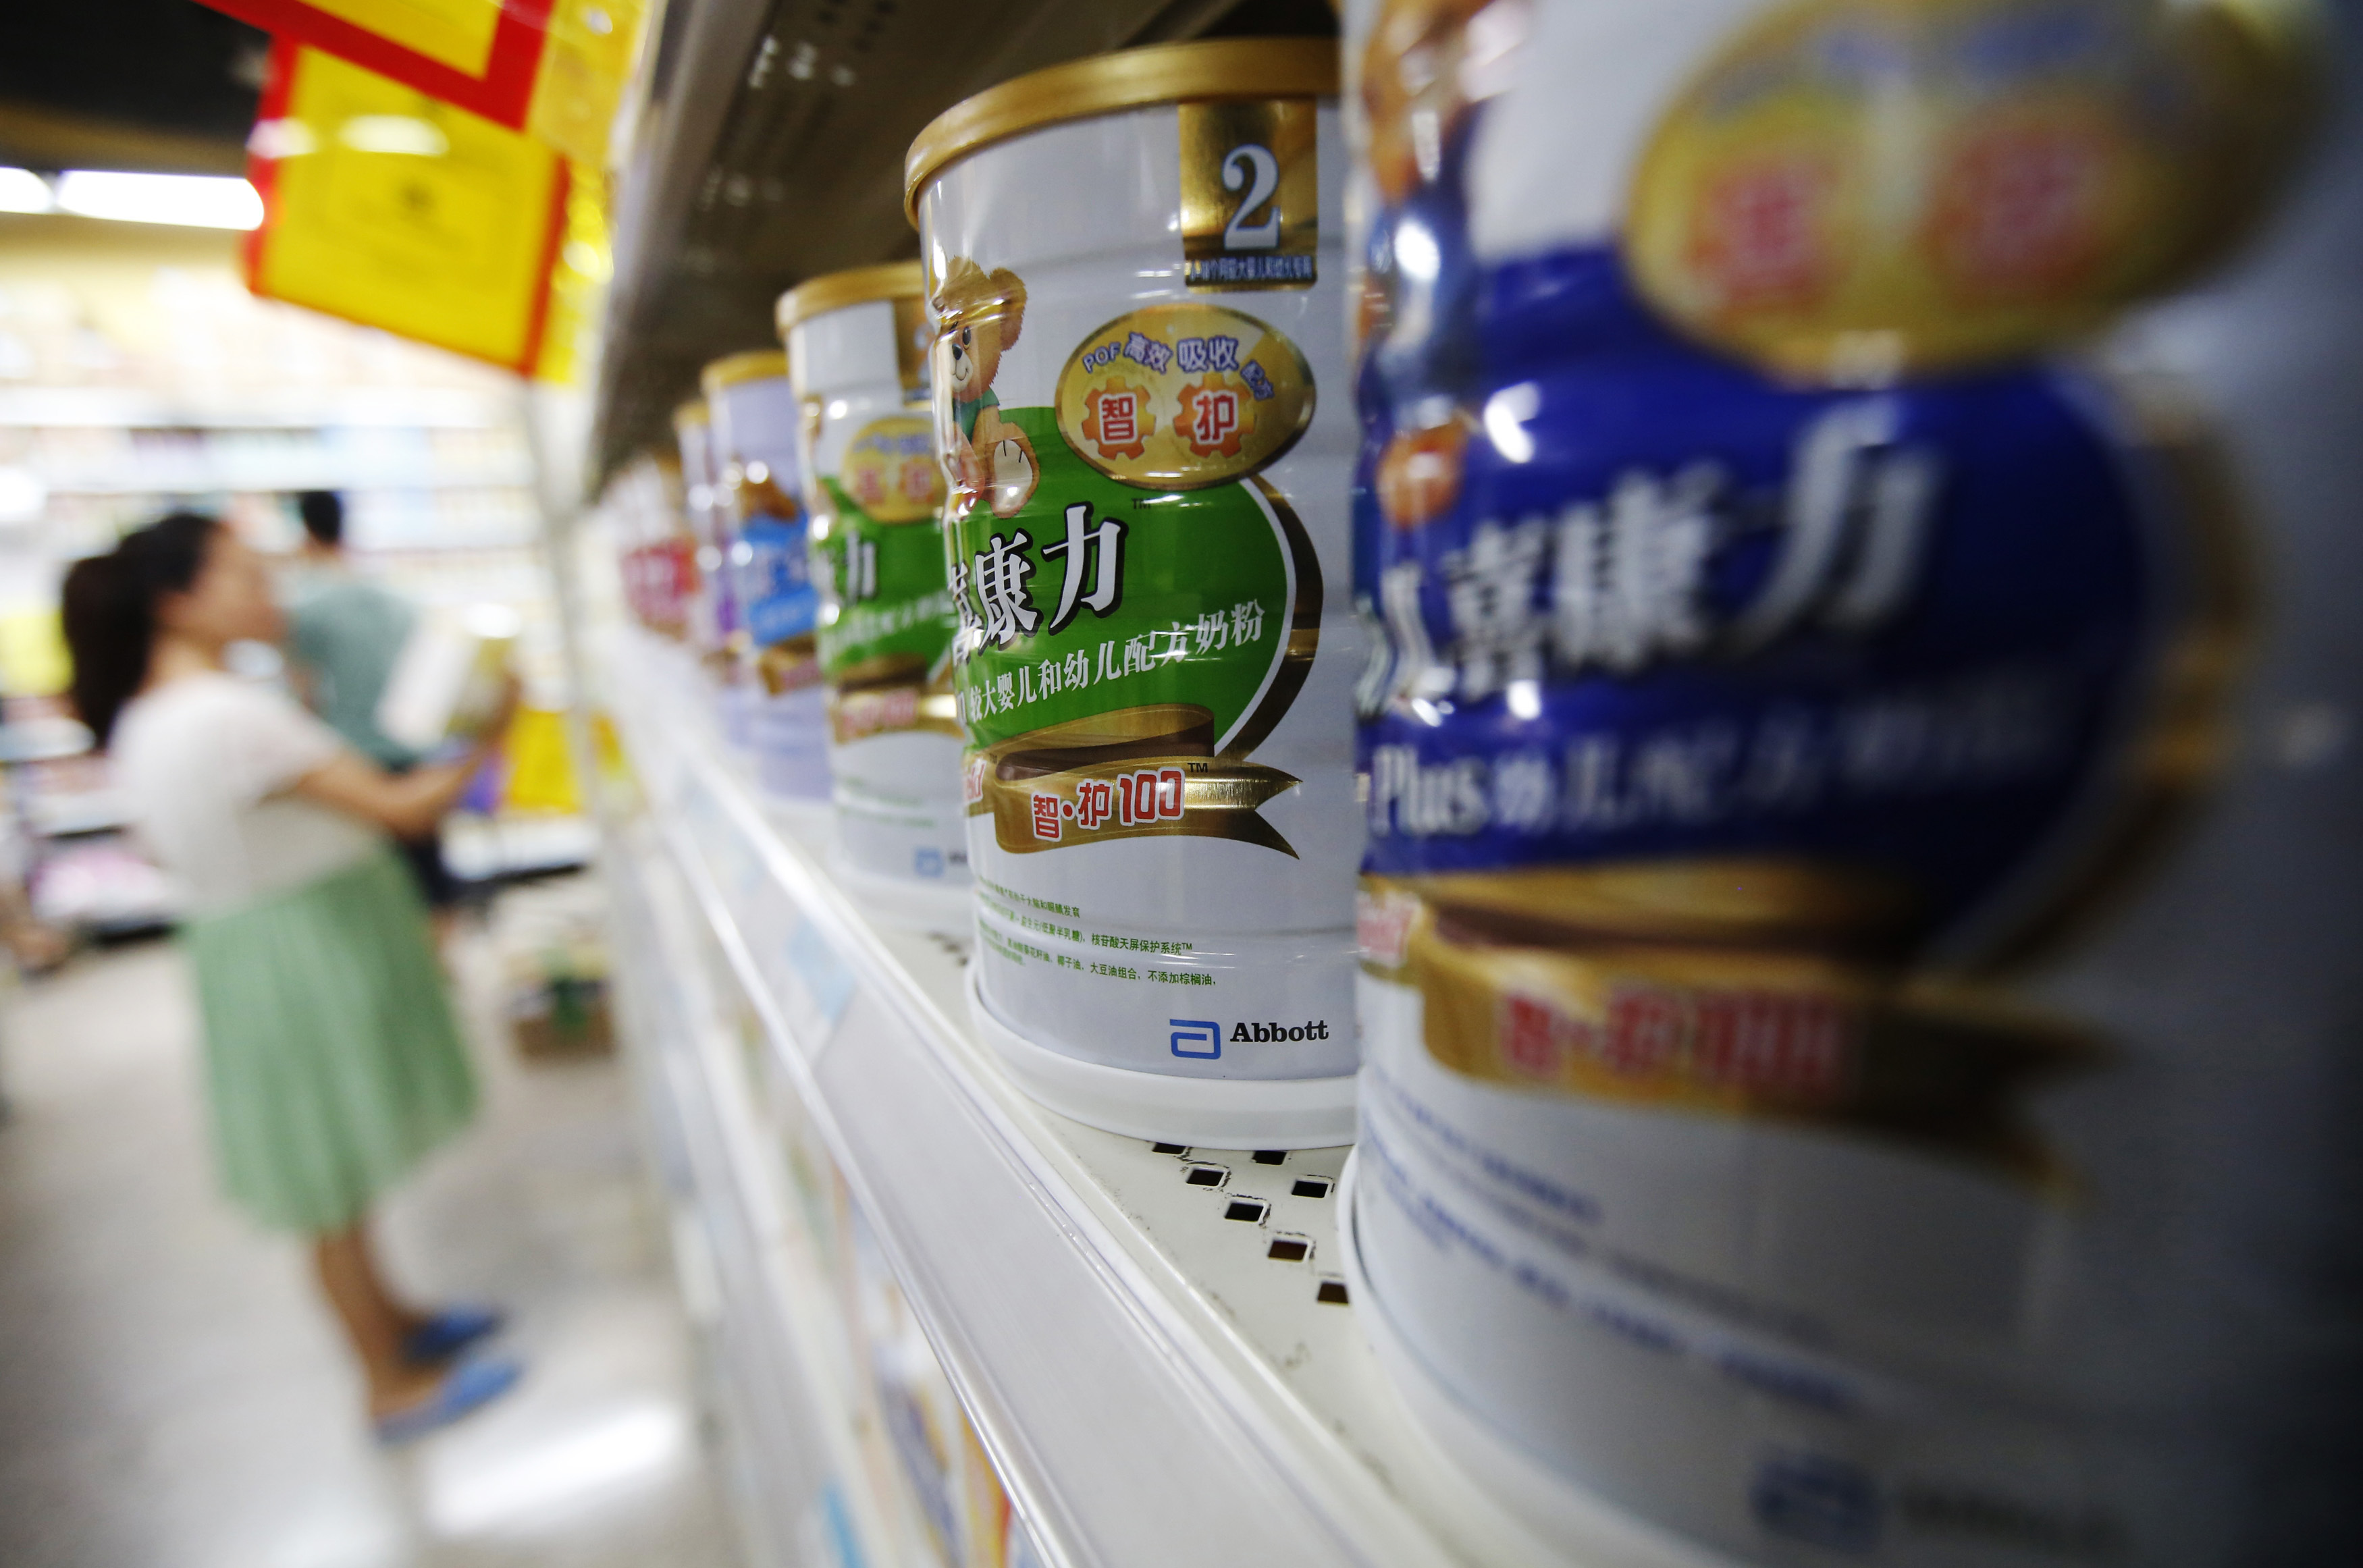 Abbott's milk powder products are displayed on a shelf at a supermarket in Beijing